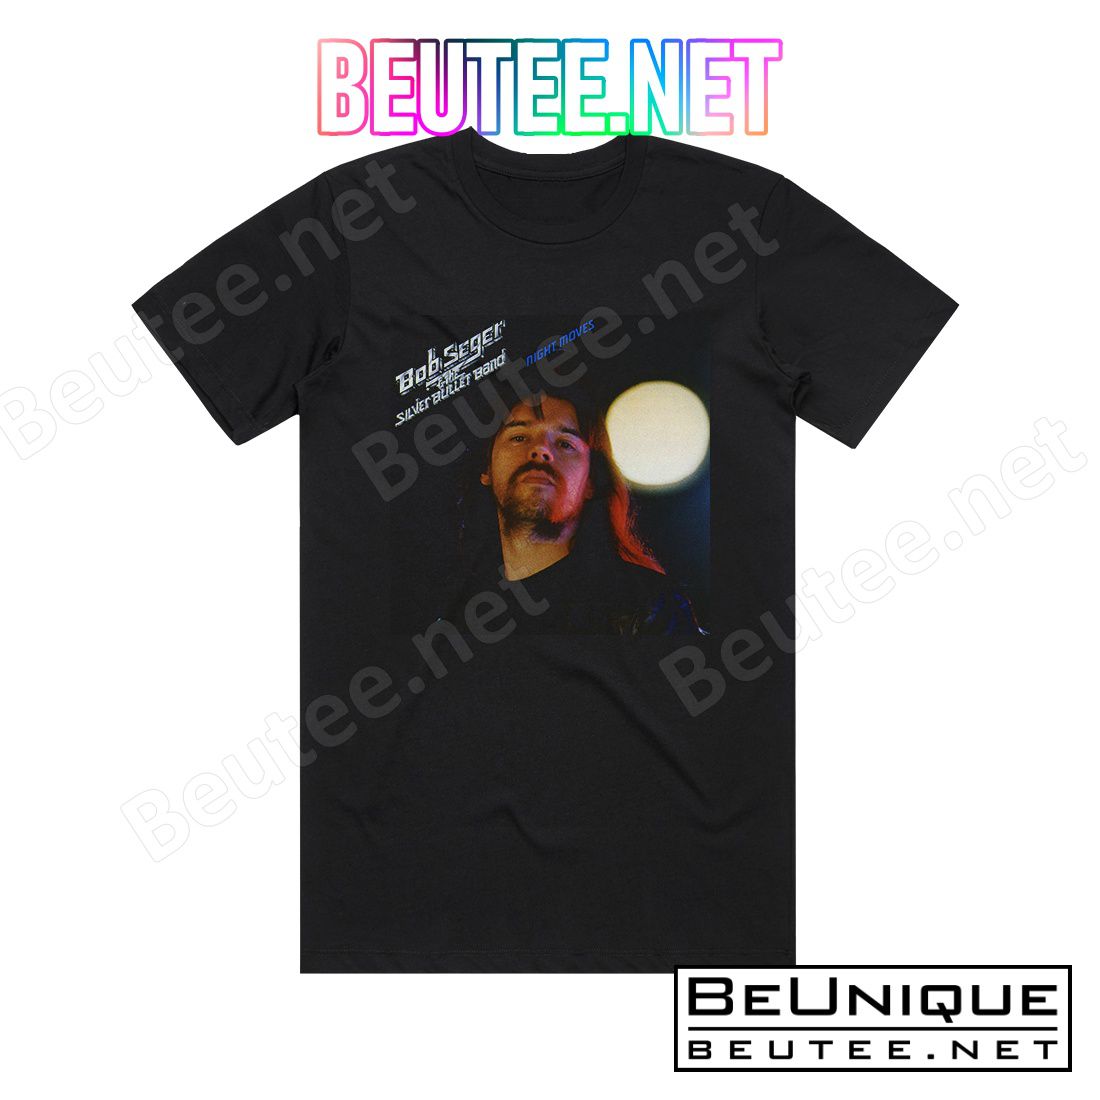 Bob Seger and The Silver Bullet Band Night Moves 1 Album Cover T-Shirt